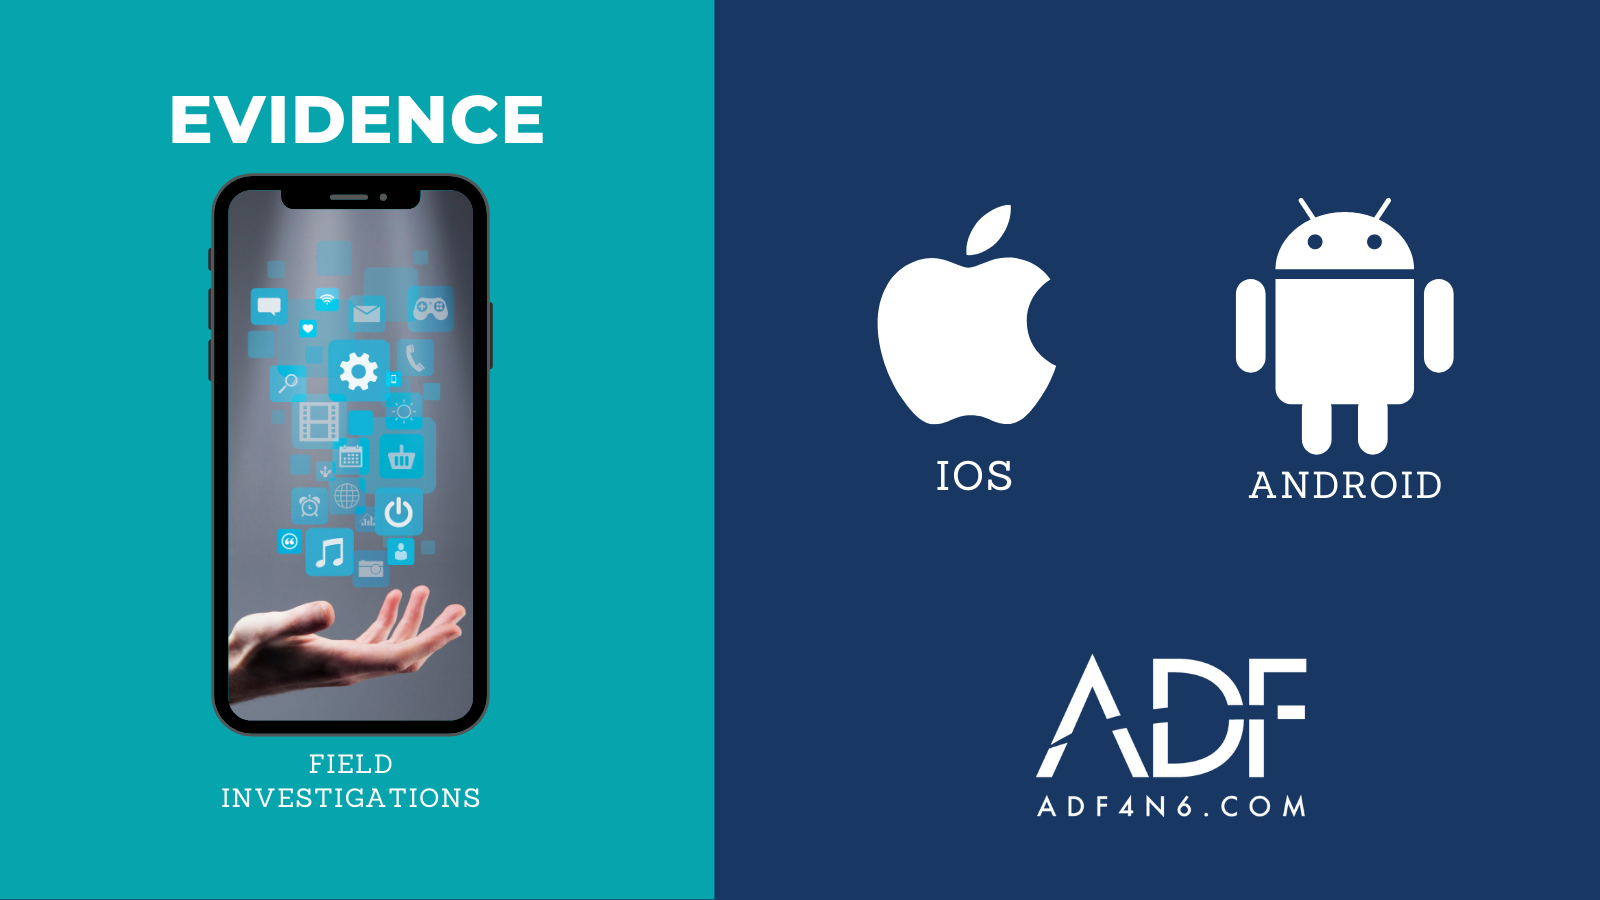 Evidence - iOS Android ADF4N6.com T